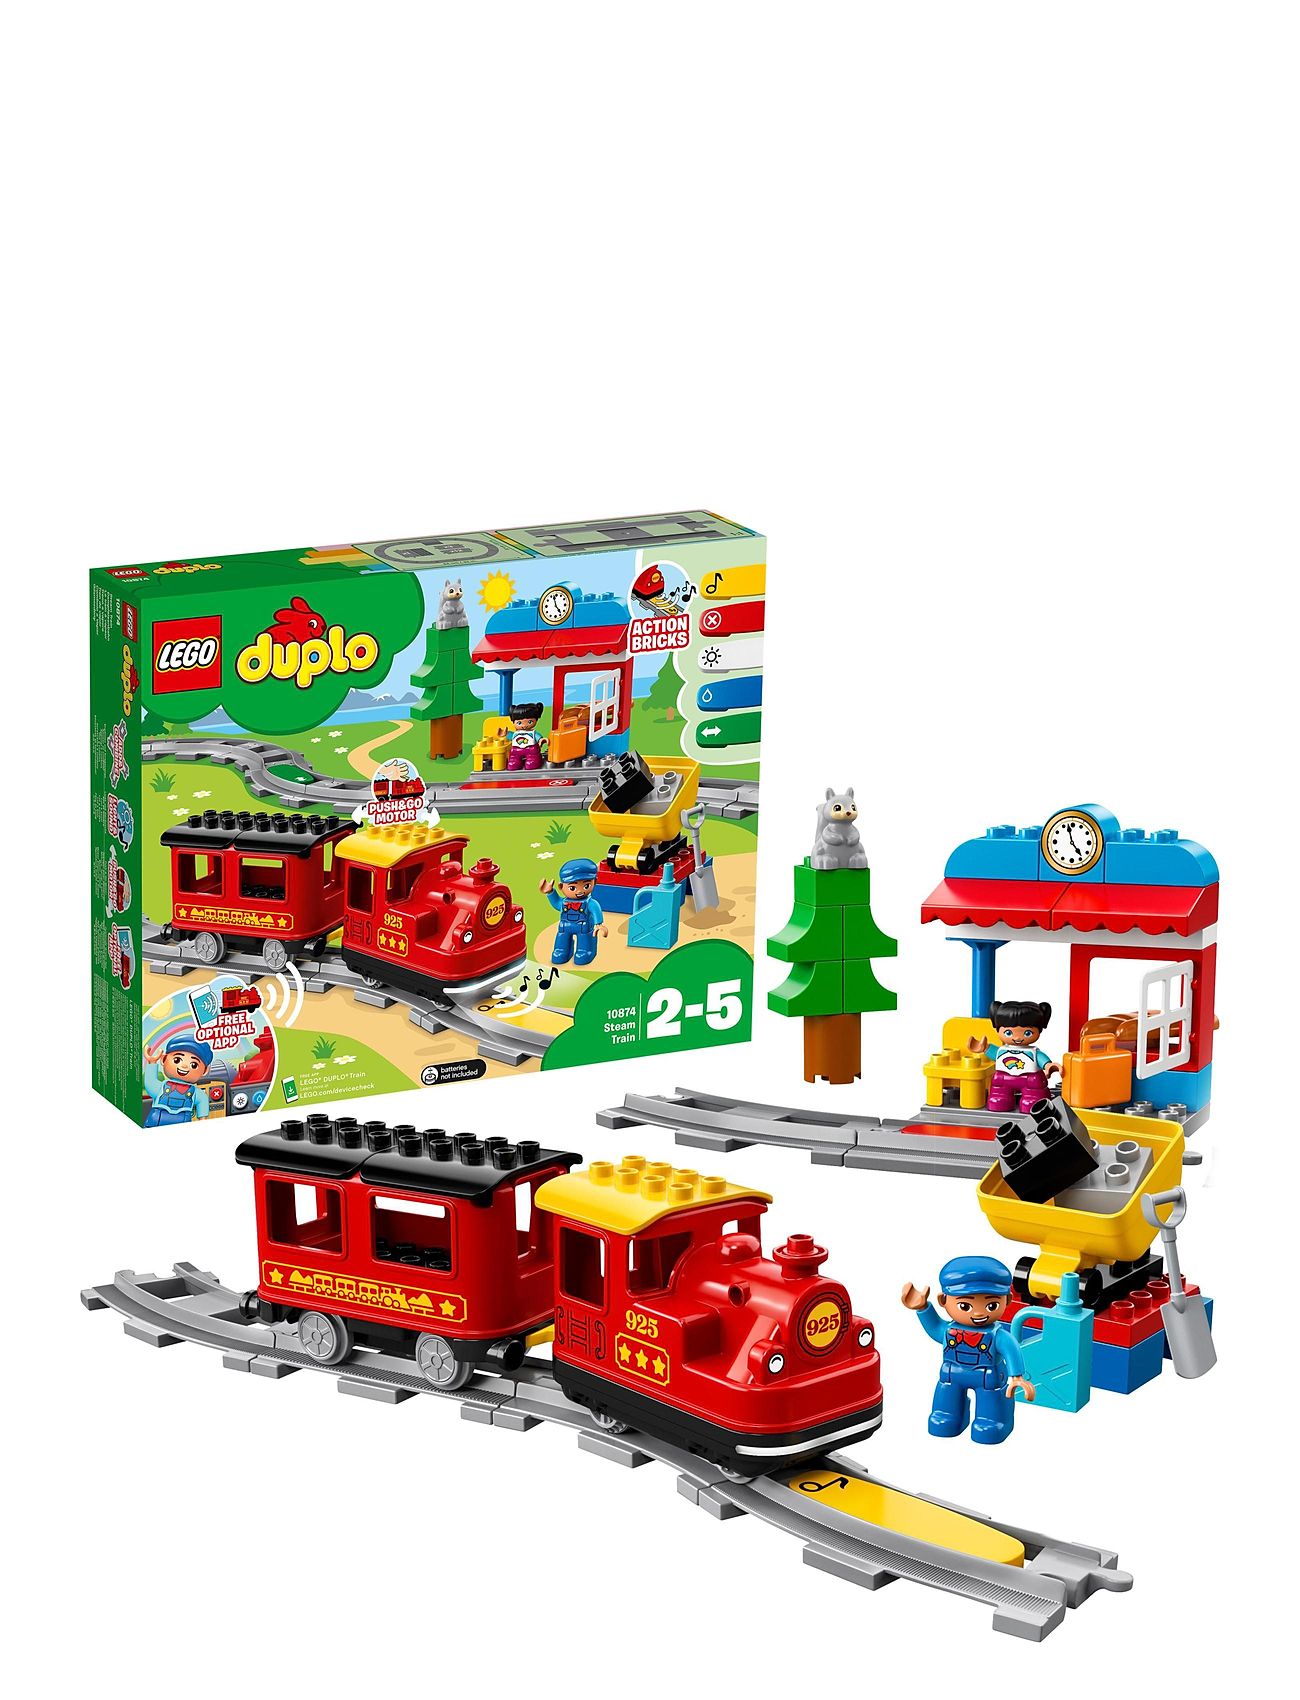 My Town Steam Train Set With Action Bricks Toys Lego Toys Lego duplo Multi/patterned LEGO